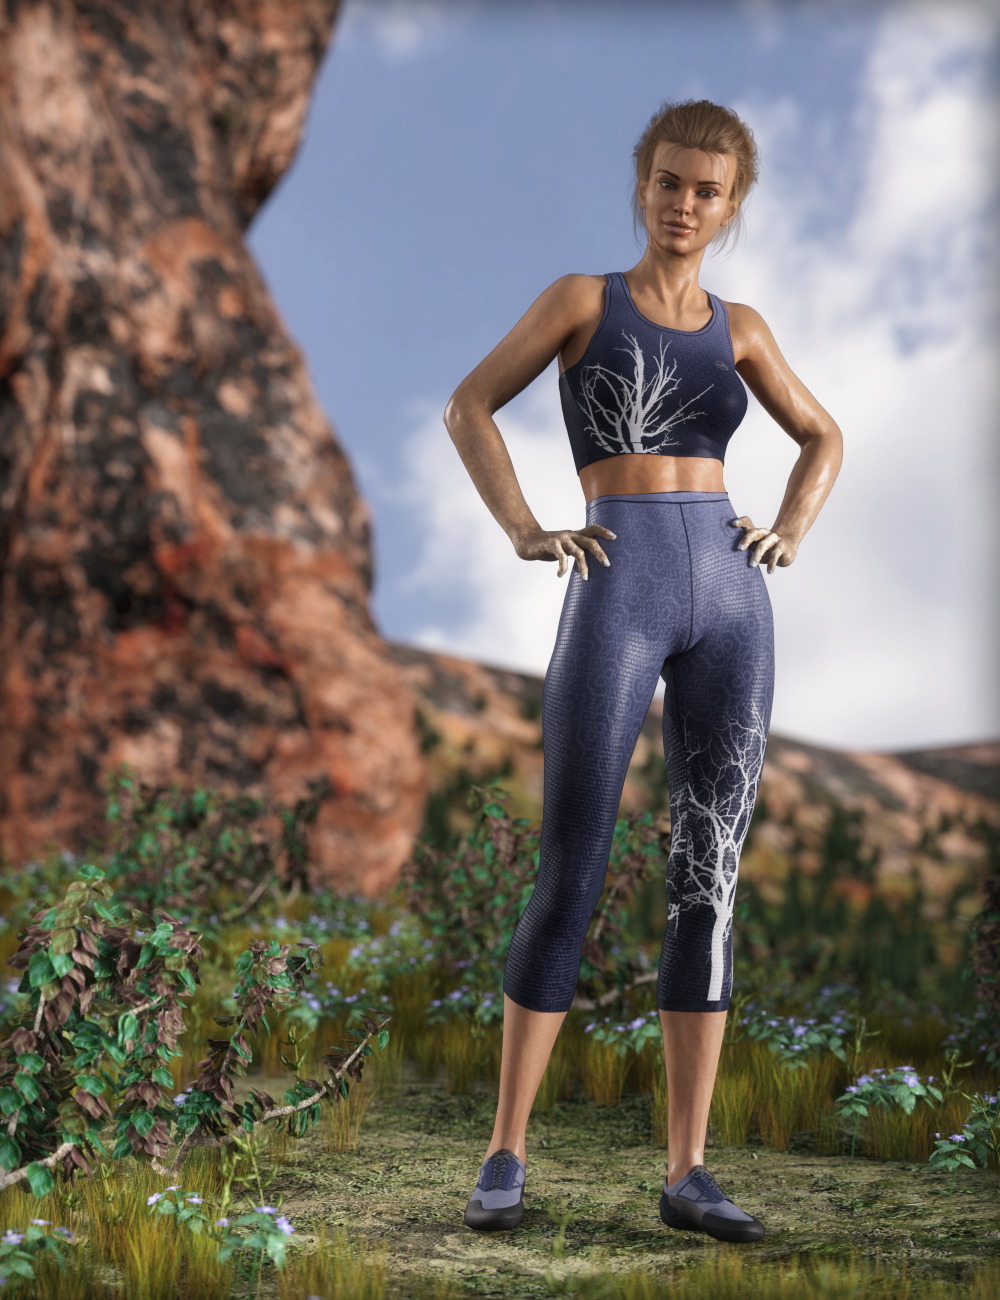 Climbing and Athletic Outfit - MikeDedes Visual Arts